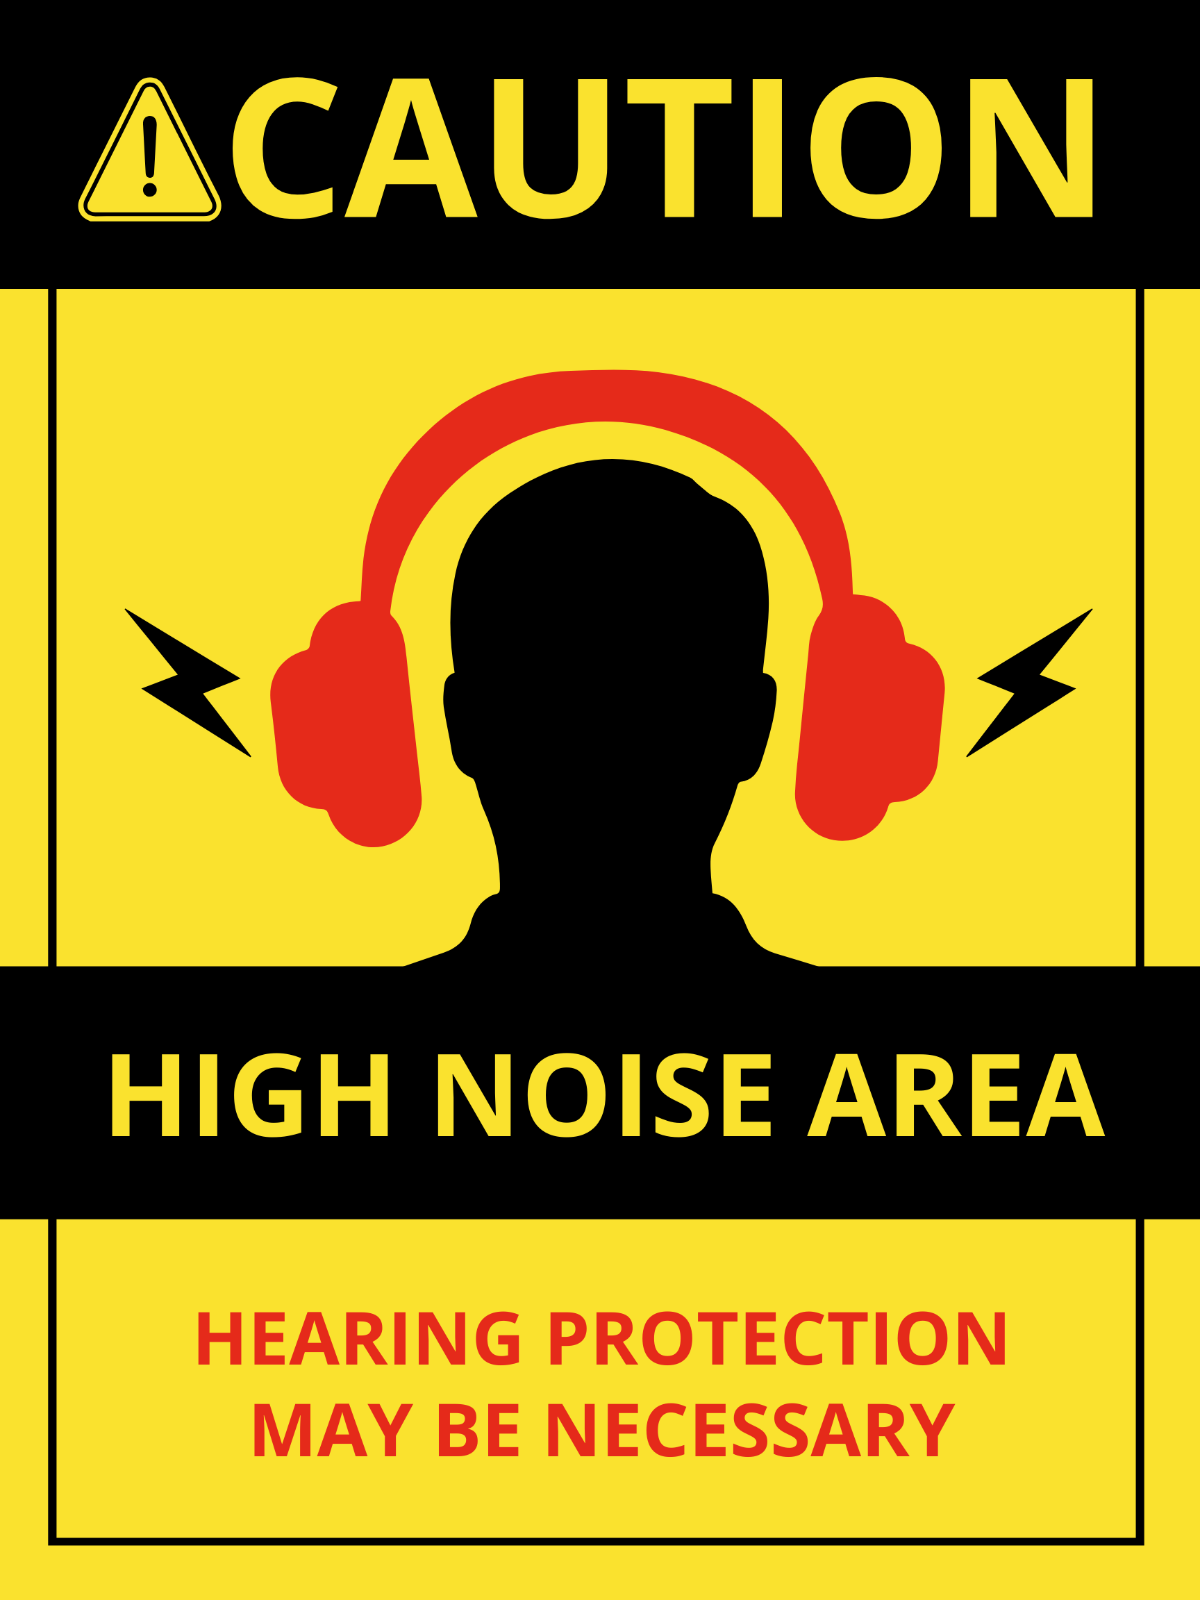 Caution - High Noise Area Hearing Protection May Be Necessary Sign Template